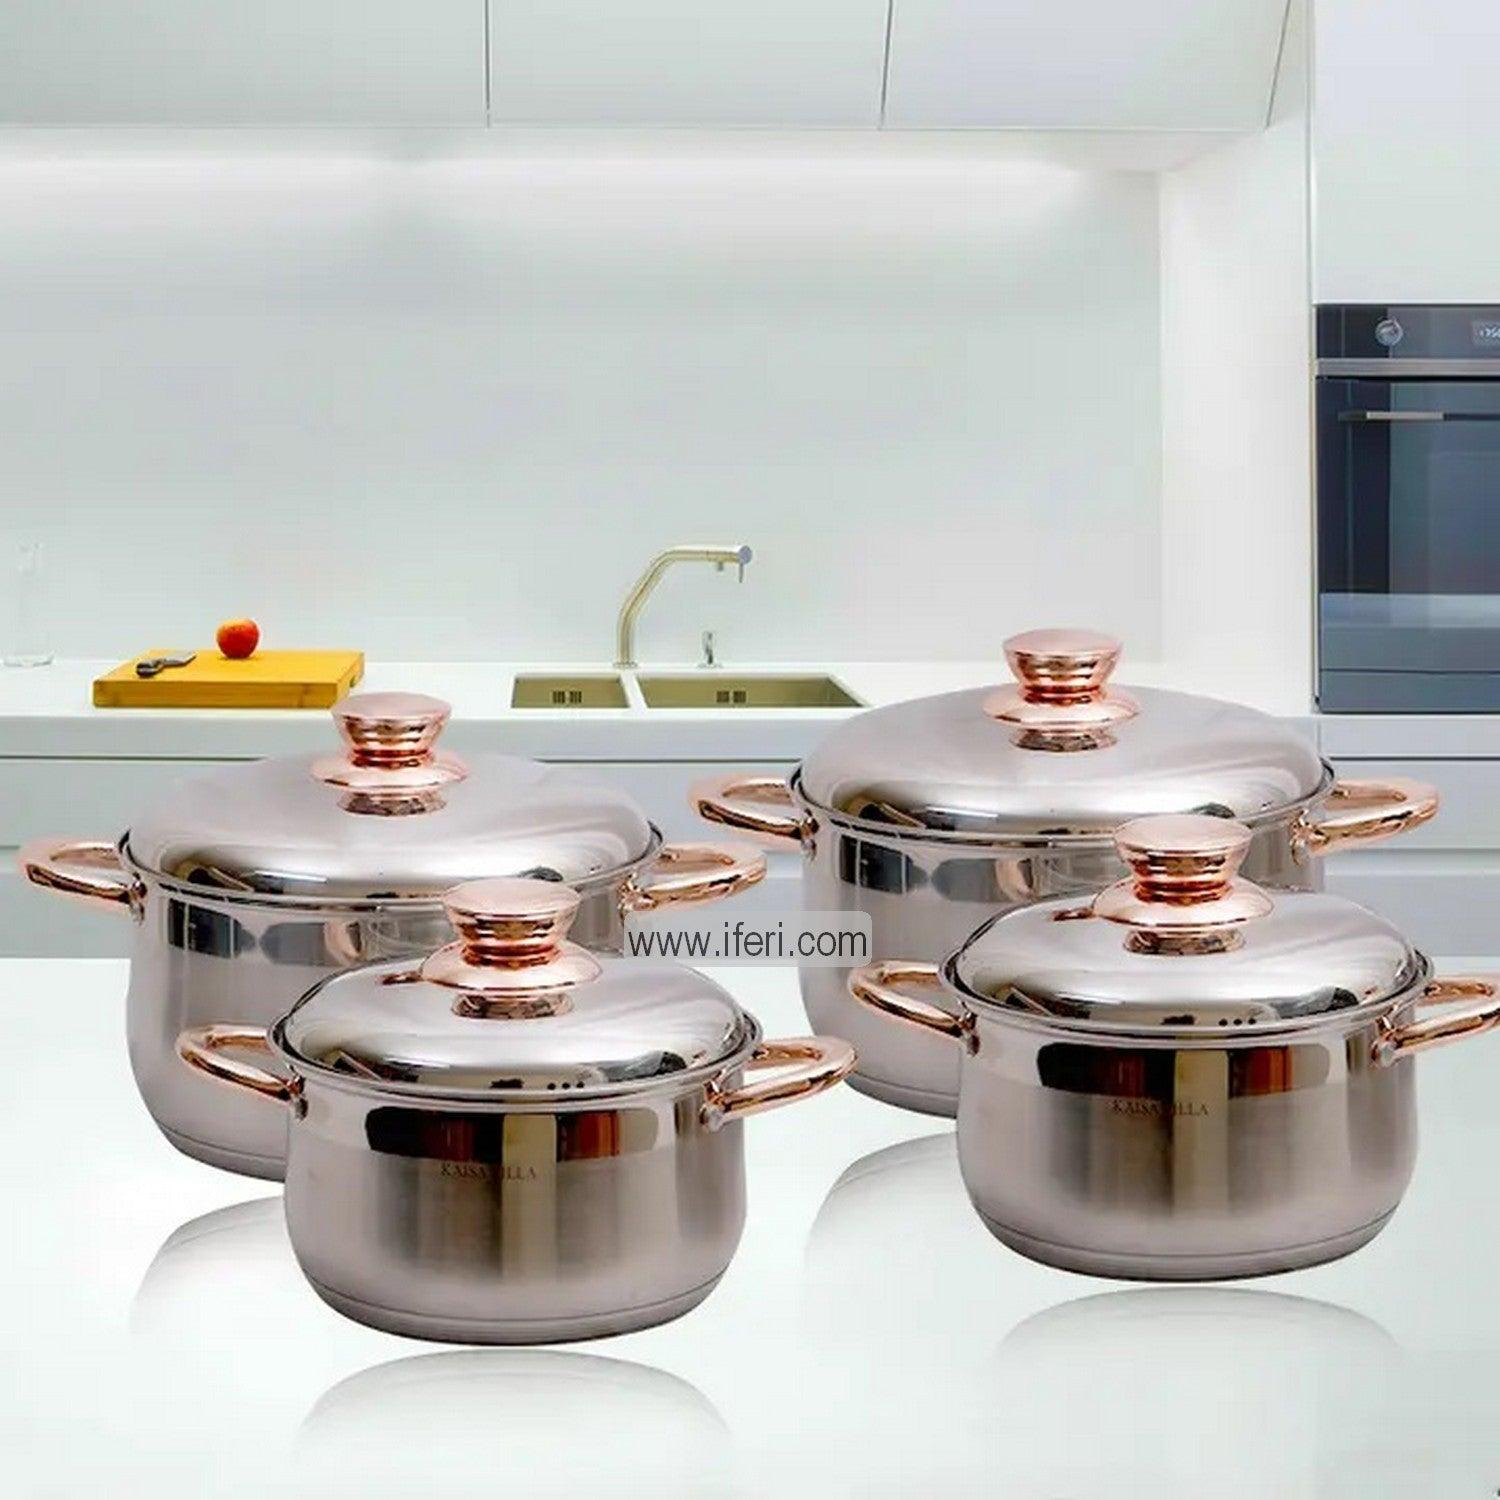 4 Pcs Stainless Steel Cookware Set with Lid KV1086 Price in Bangladesh - iferi.com